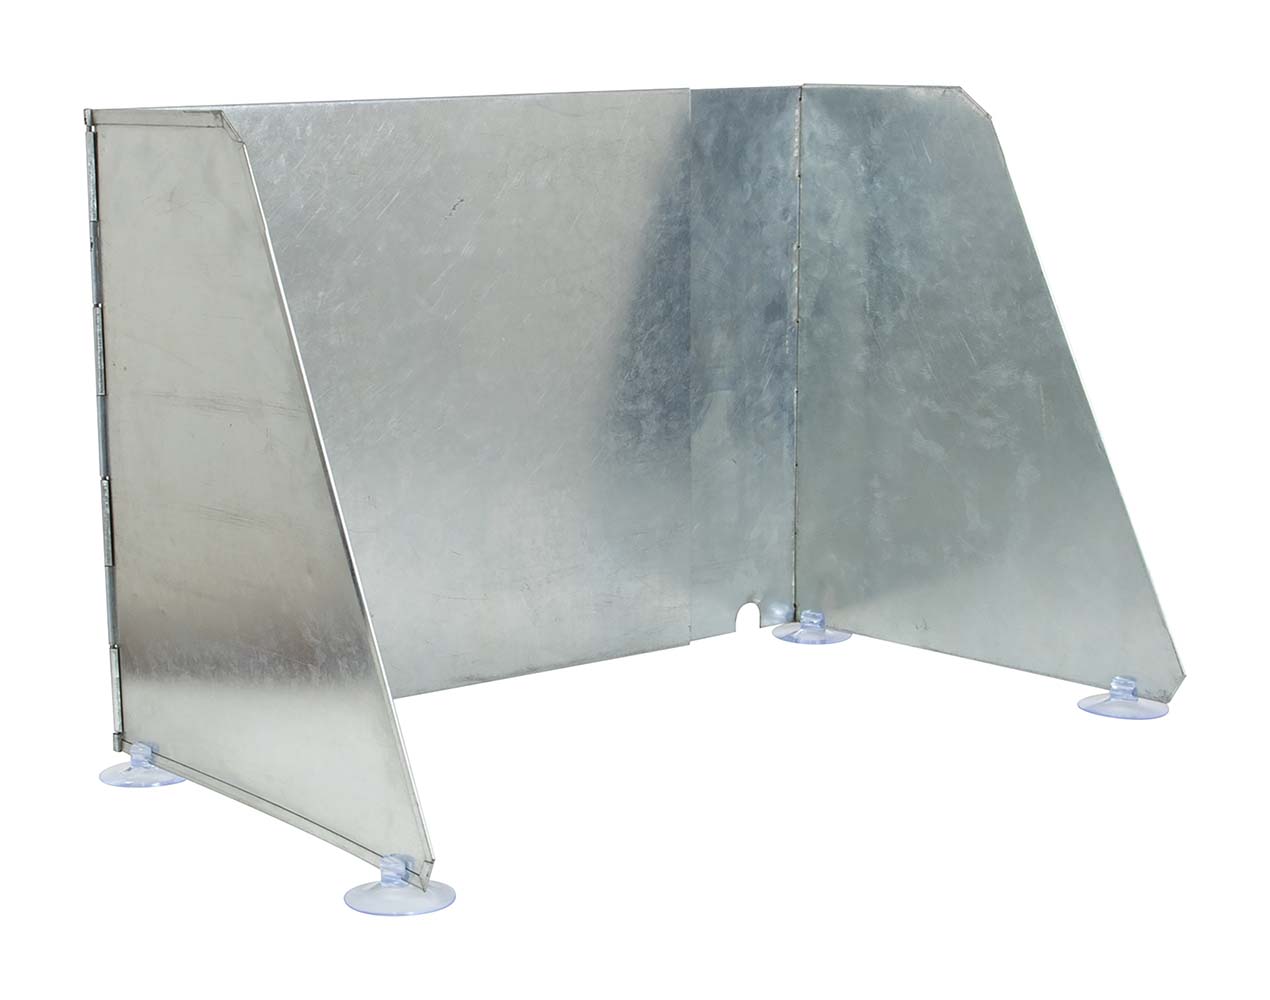 1509257 A fully retractable and collapsible universal cooking windbreak. Ideal for use with a gas burner or stove, preventing the flame from blowing out and transferring it more effectively to the pan. The screen is adjustable in width from 38 to 70 centimeters. Attachable by means of suction cups. After use, the windbreak is easy and compact to store.